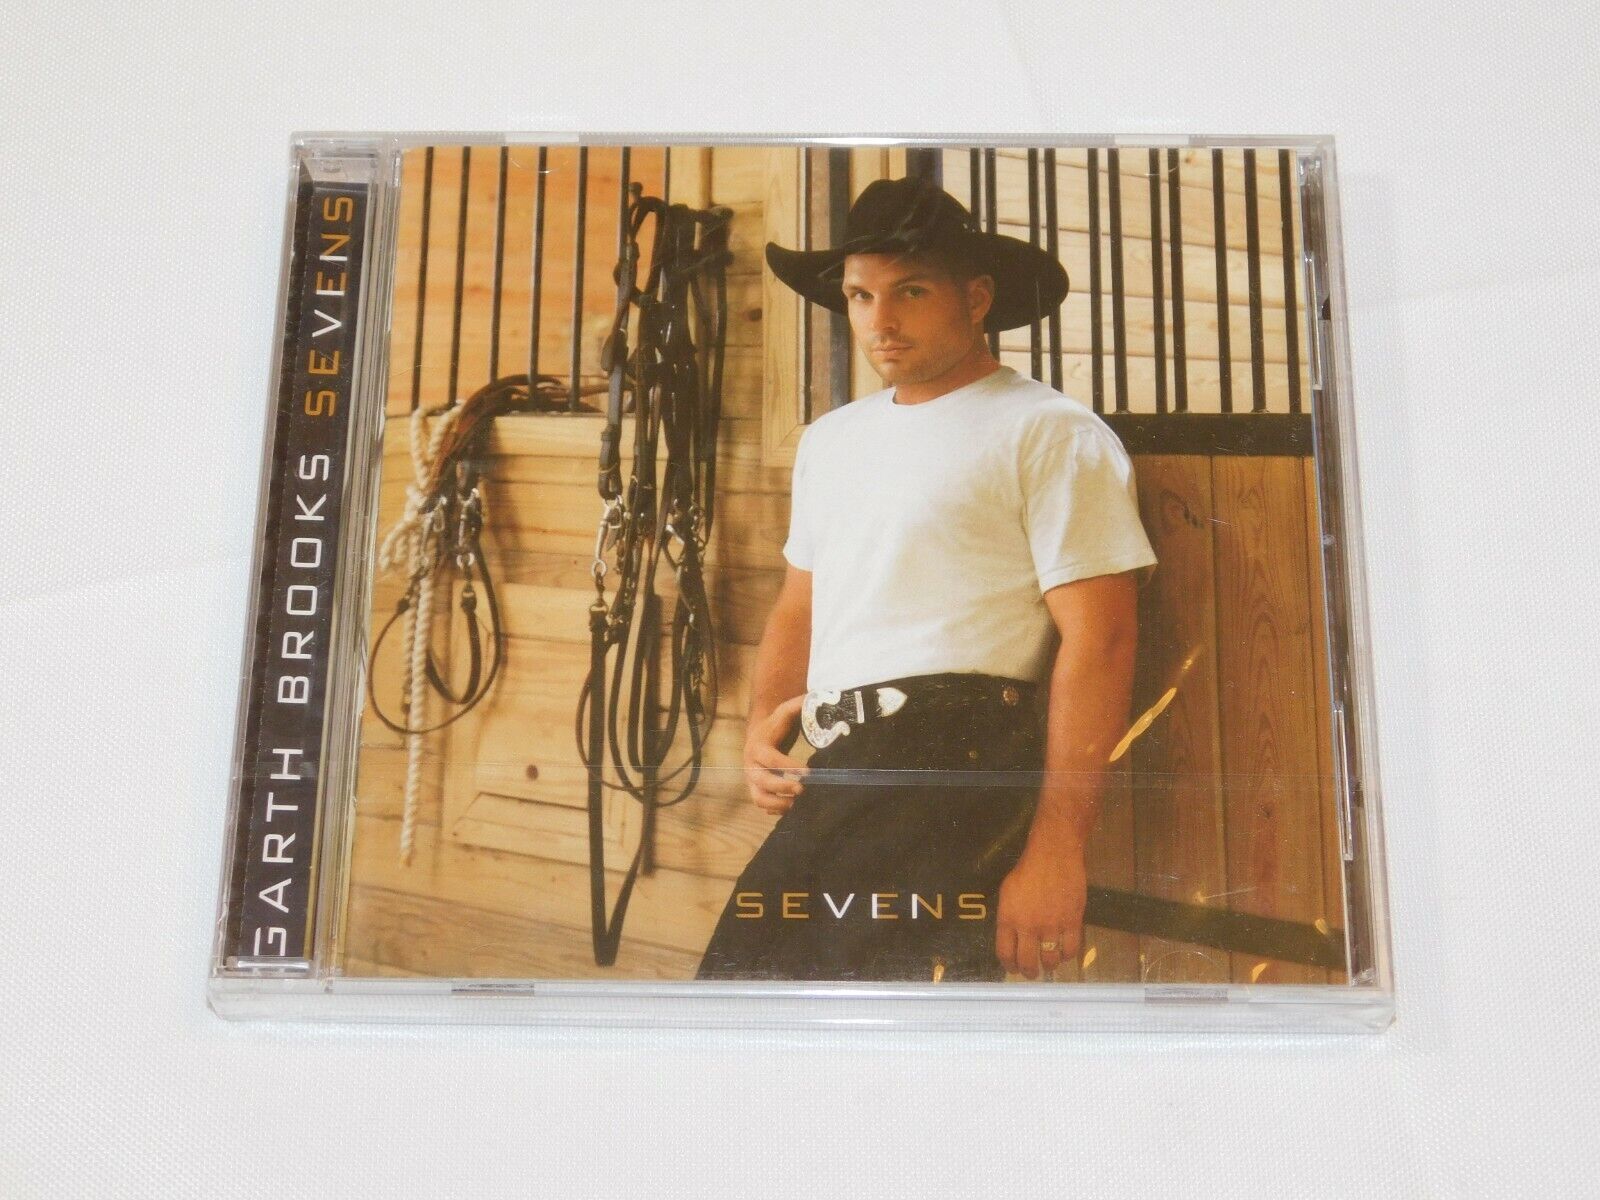 Primary image for Sevens by Garth Brooks (CD, Nov-1997, Capitol Records) When There's No One Ar --